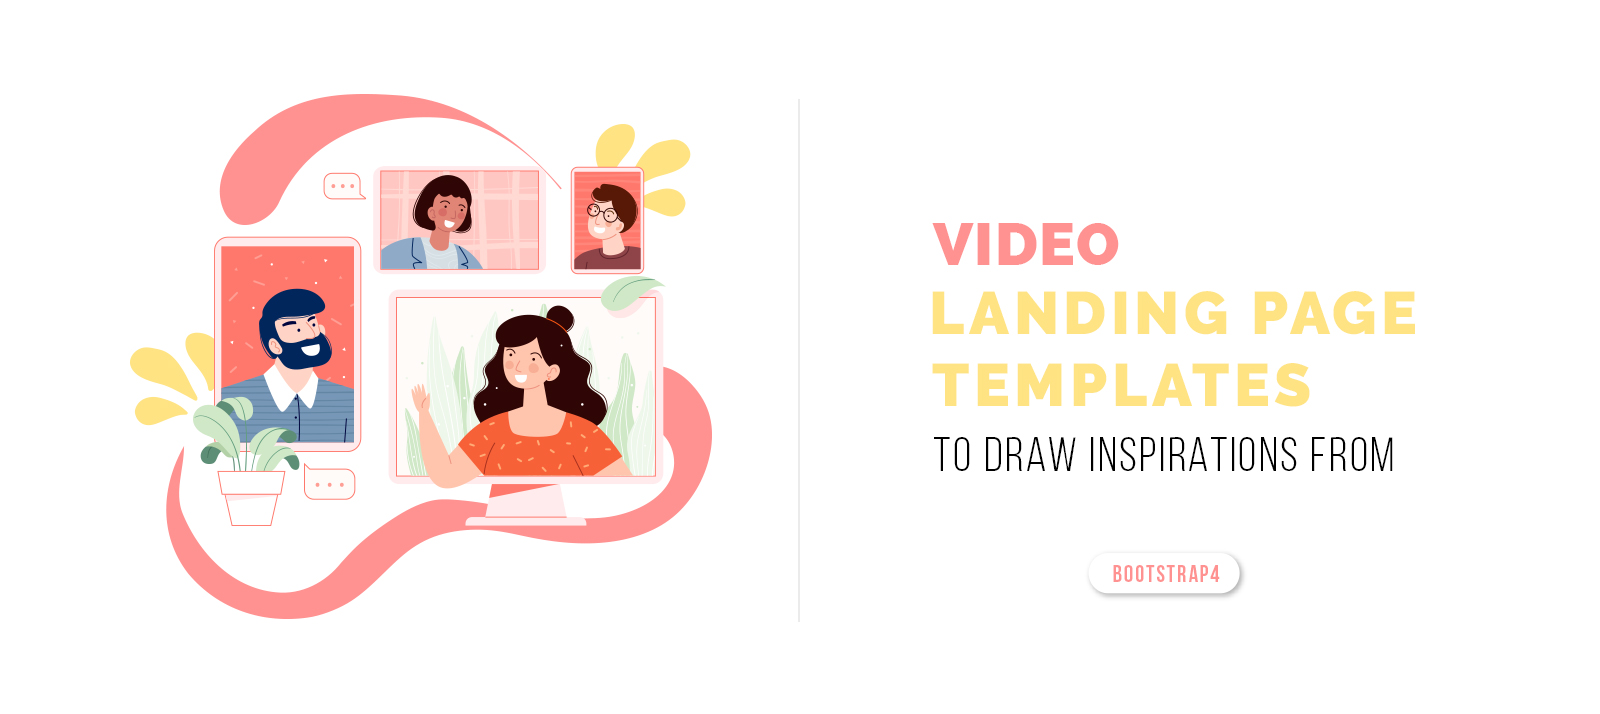  Bootstrap 5 Video Landing Page Templates to Draw Inspirations From